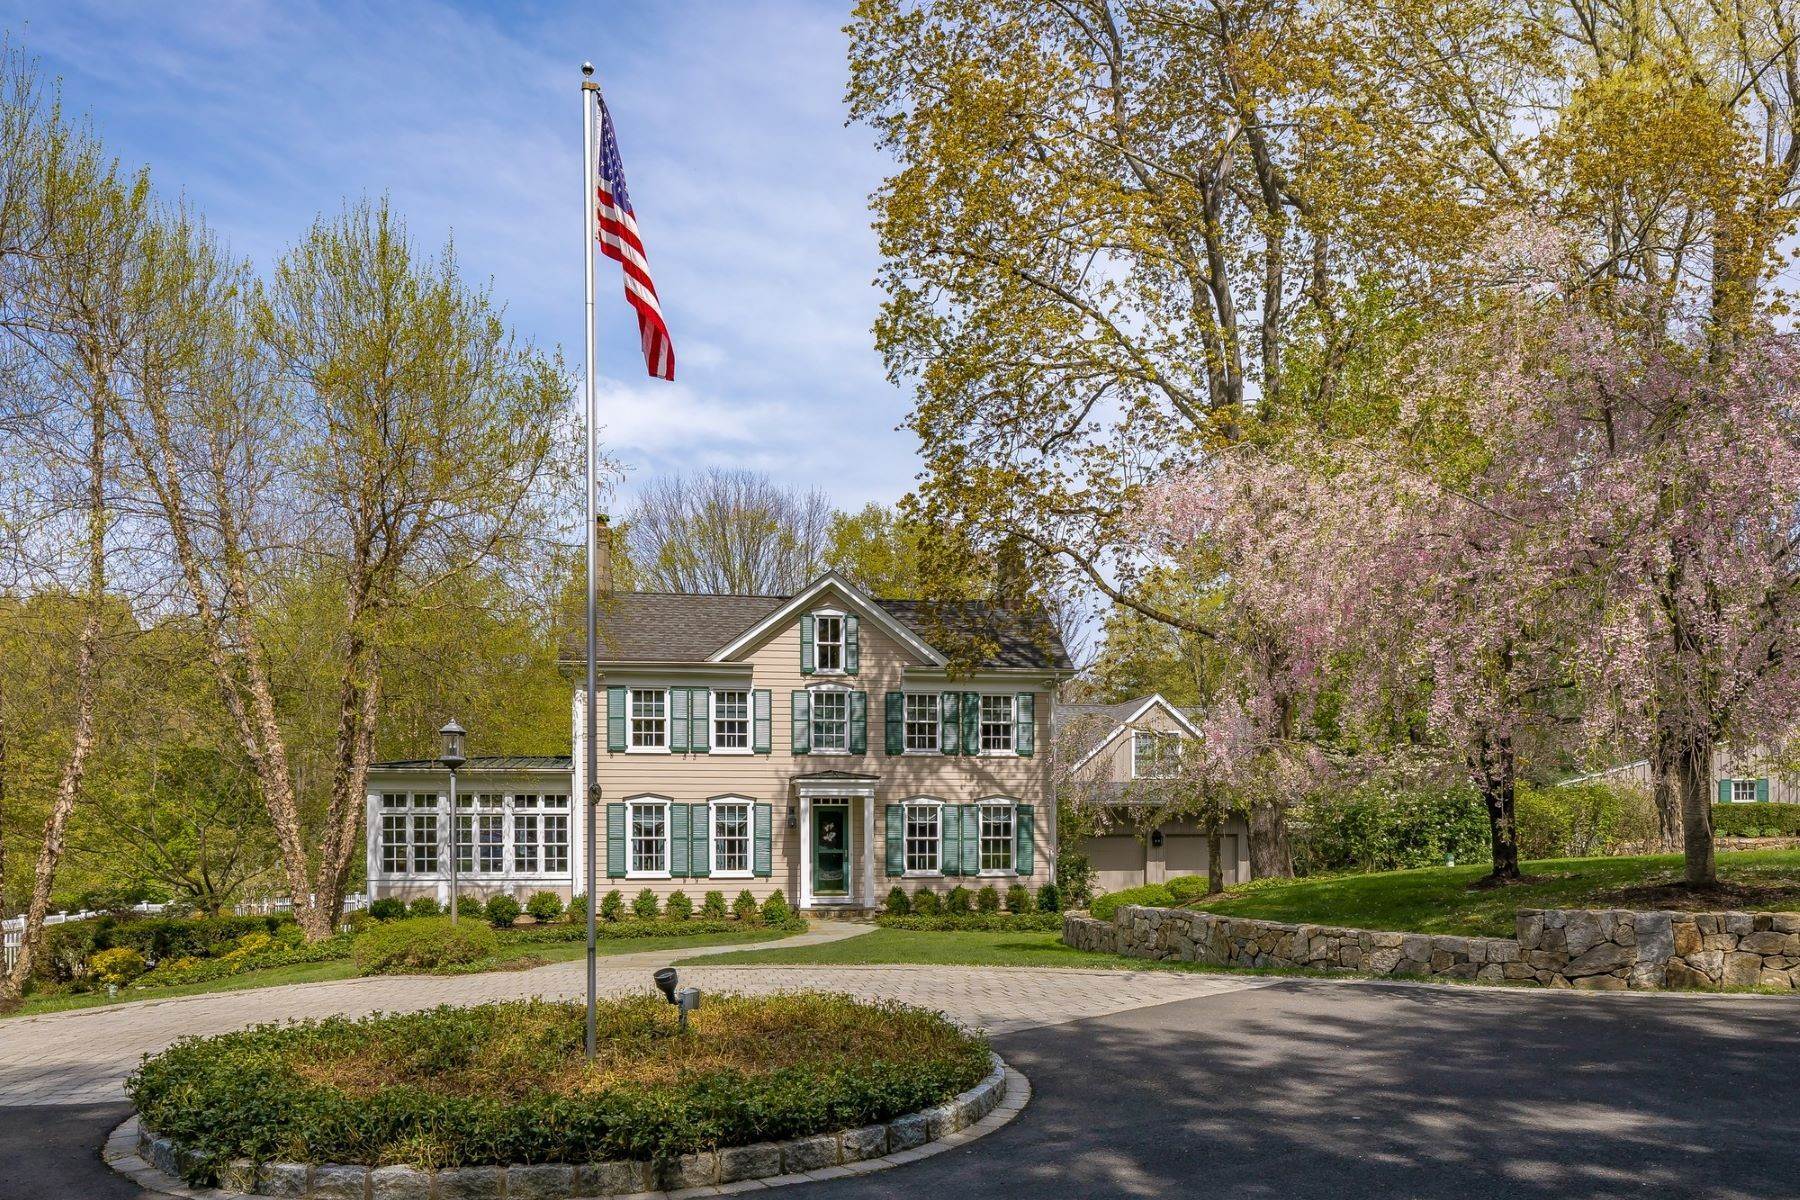 Property for Sale at Leaning Oak Pond 351 Hilltop Road Mendham, New Jersey 07945 United States